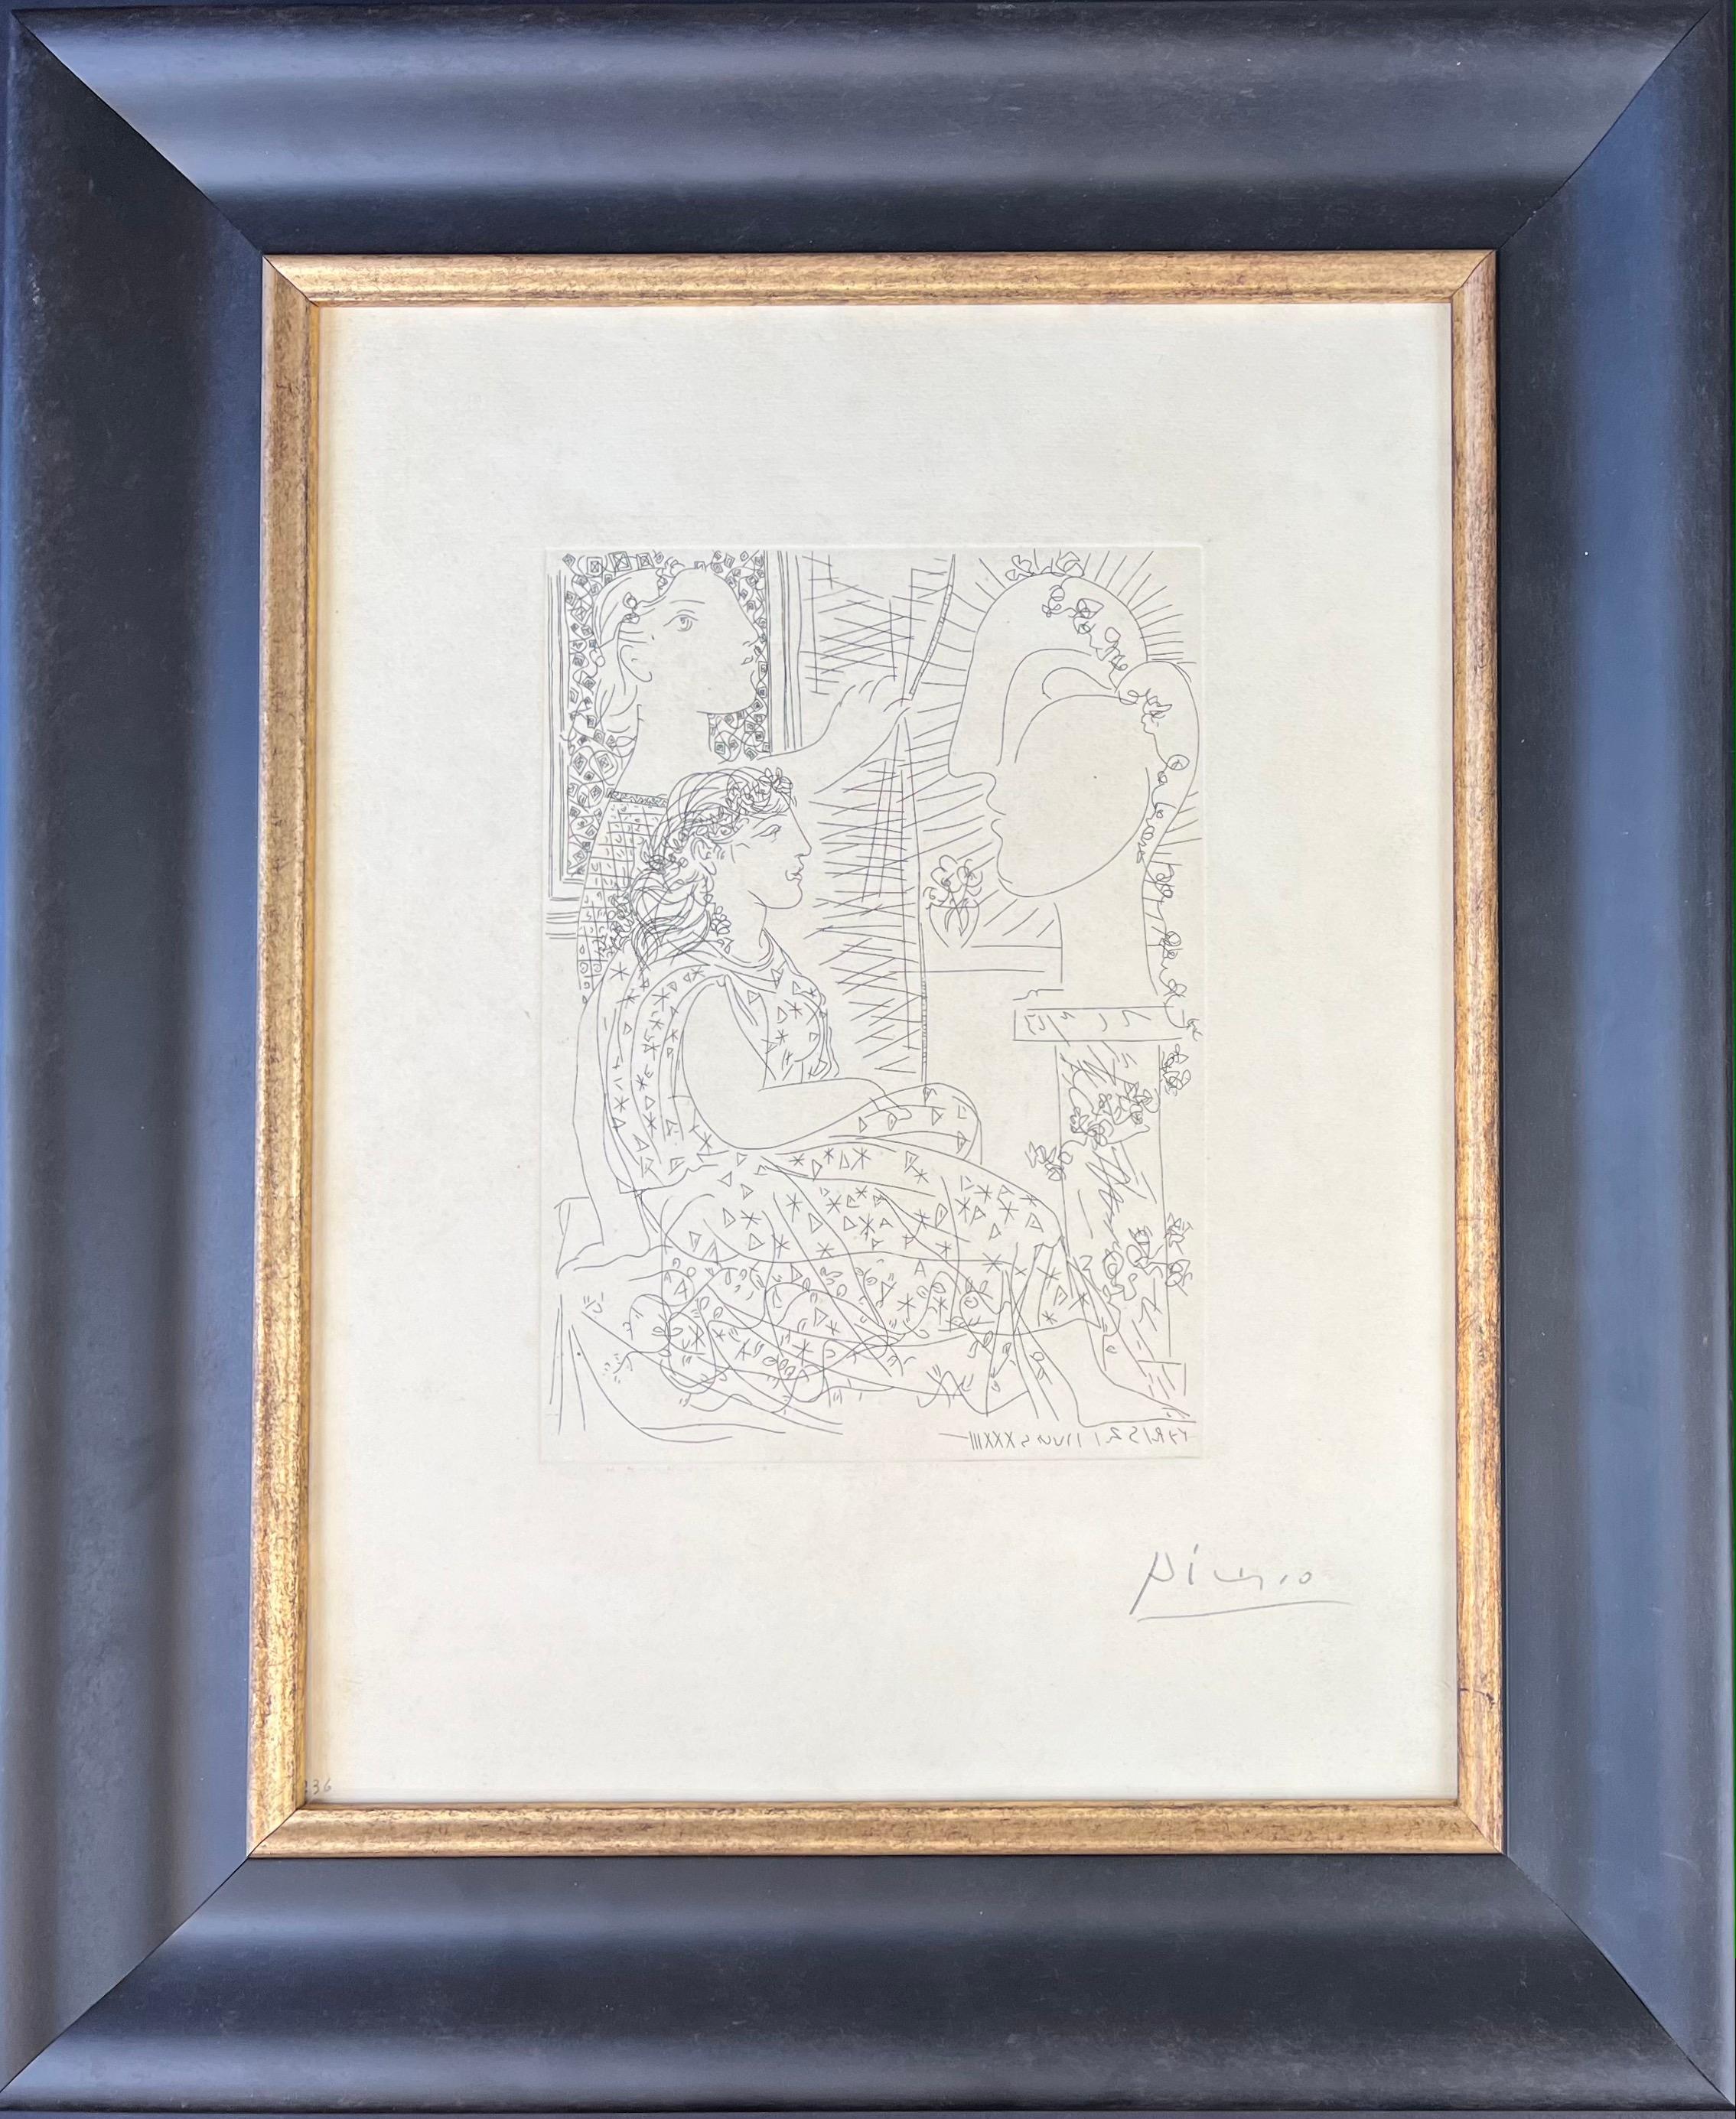 etching on Montaval paper, edited in 1933
Limited edition of 250 copies 
signed in pencil by artist in lower right corner
paper size: : 44,5 x 34 cm
framed size: 59 x 49 cm
important wood frame included
very good conditions, slight paper